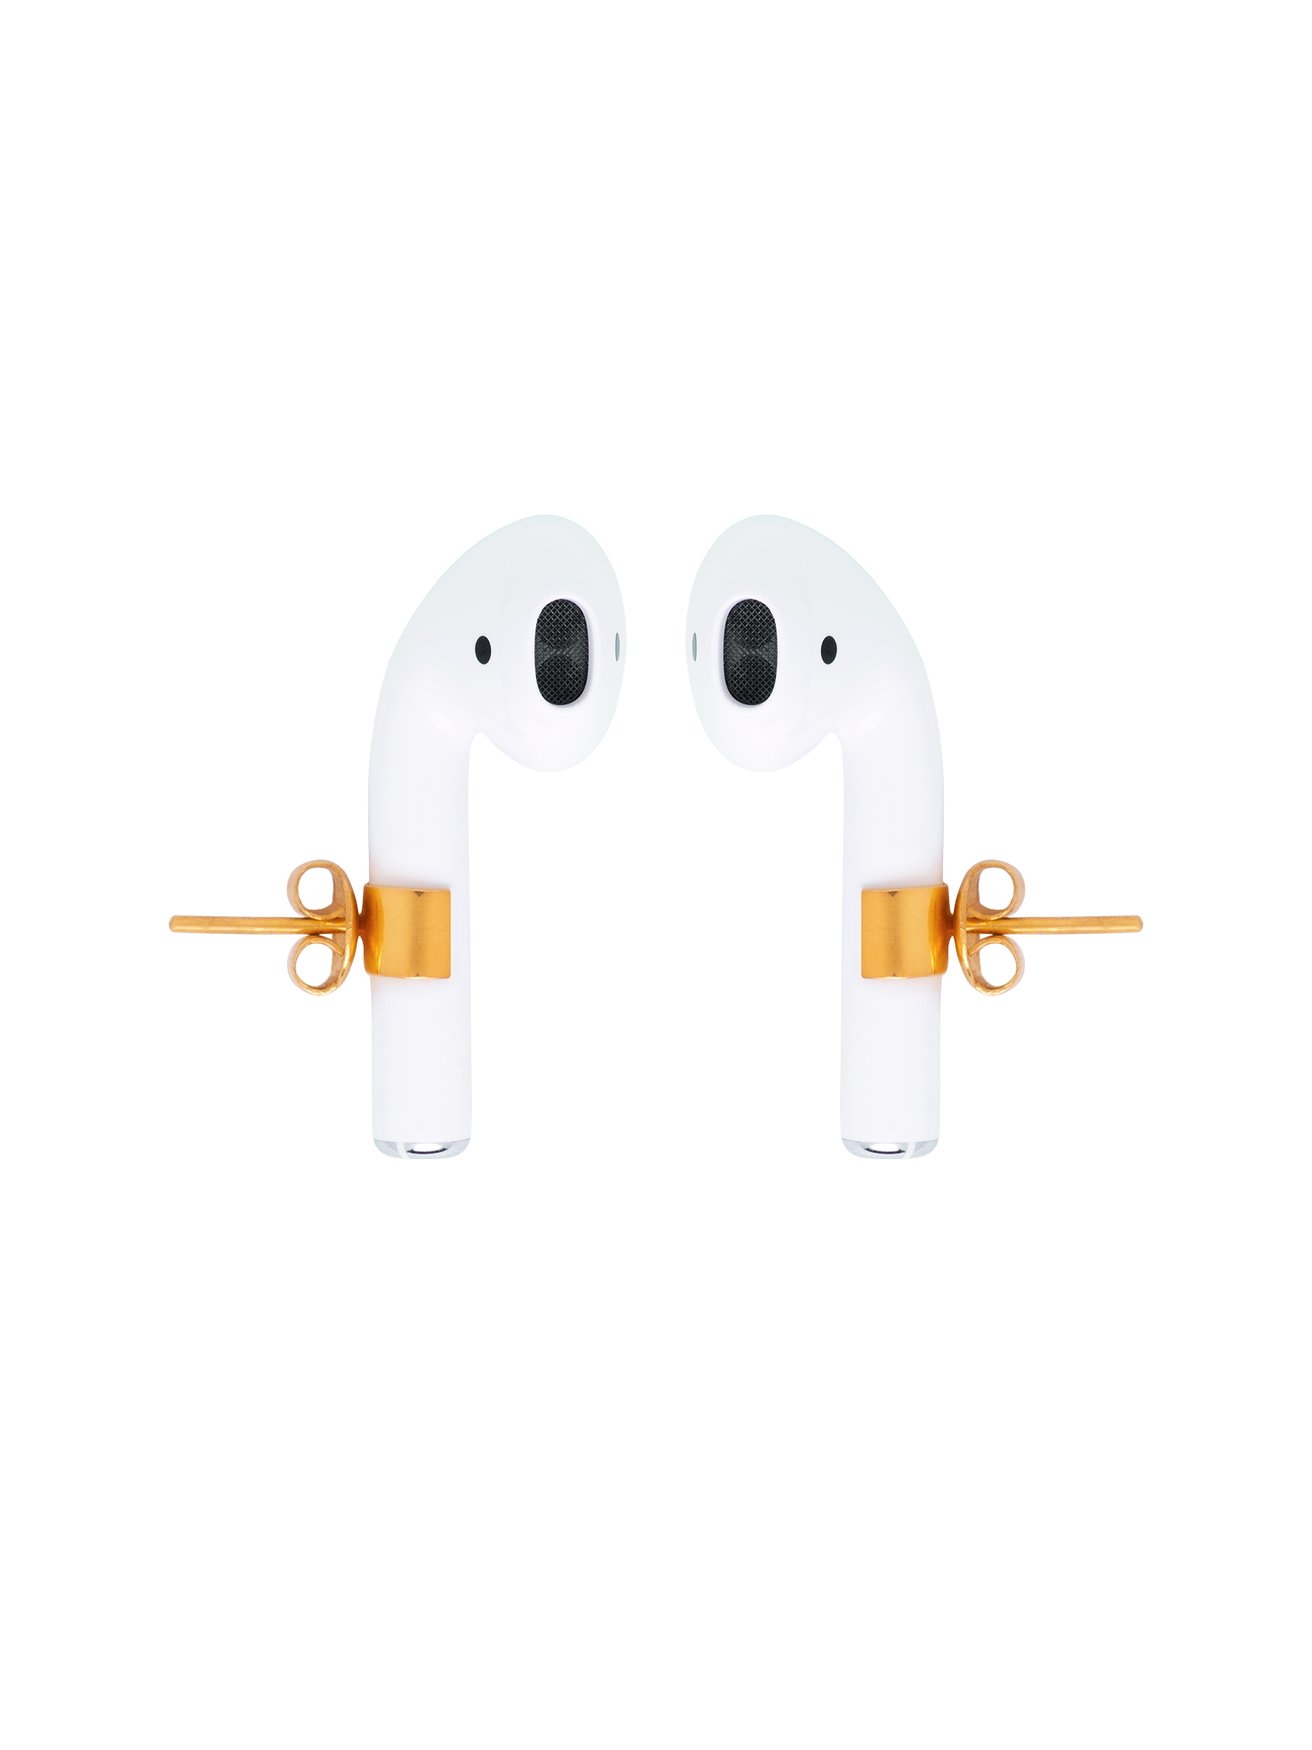 Airpods-6